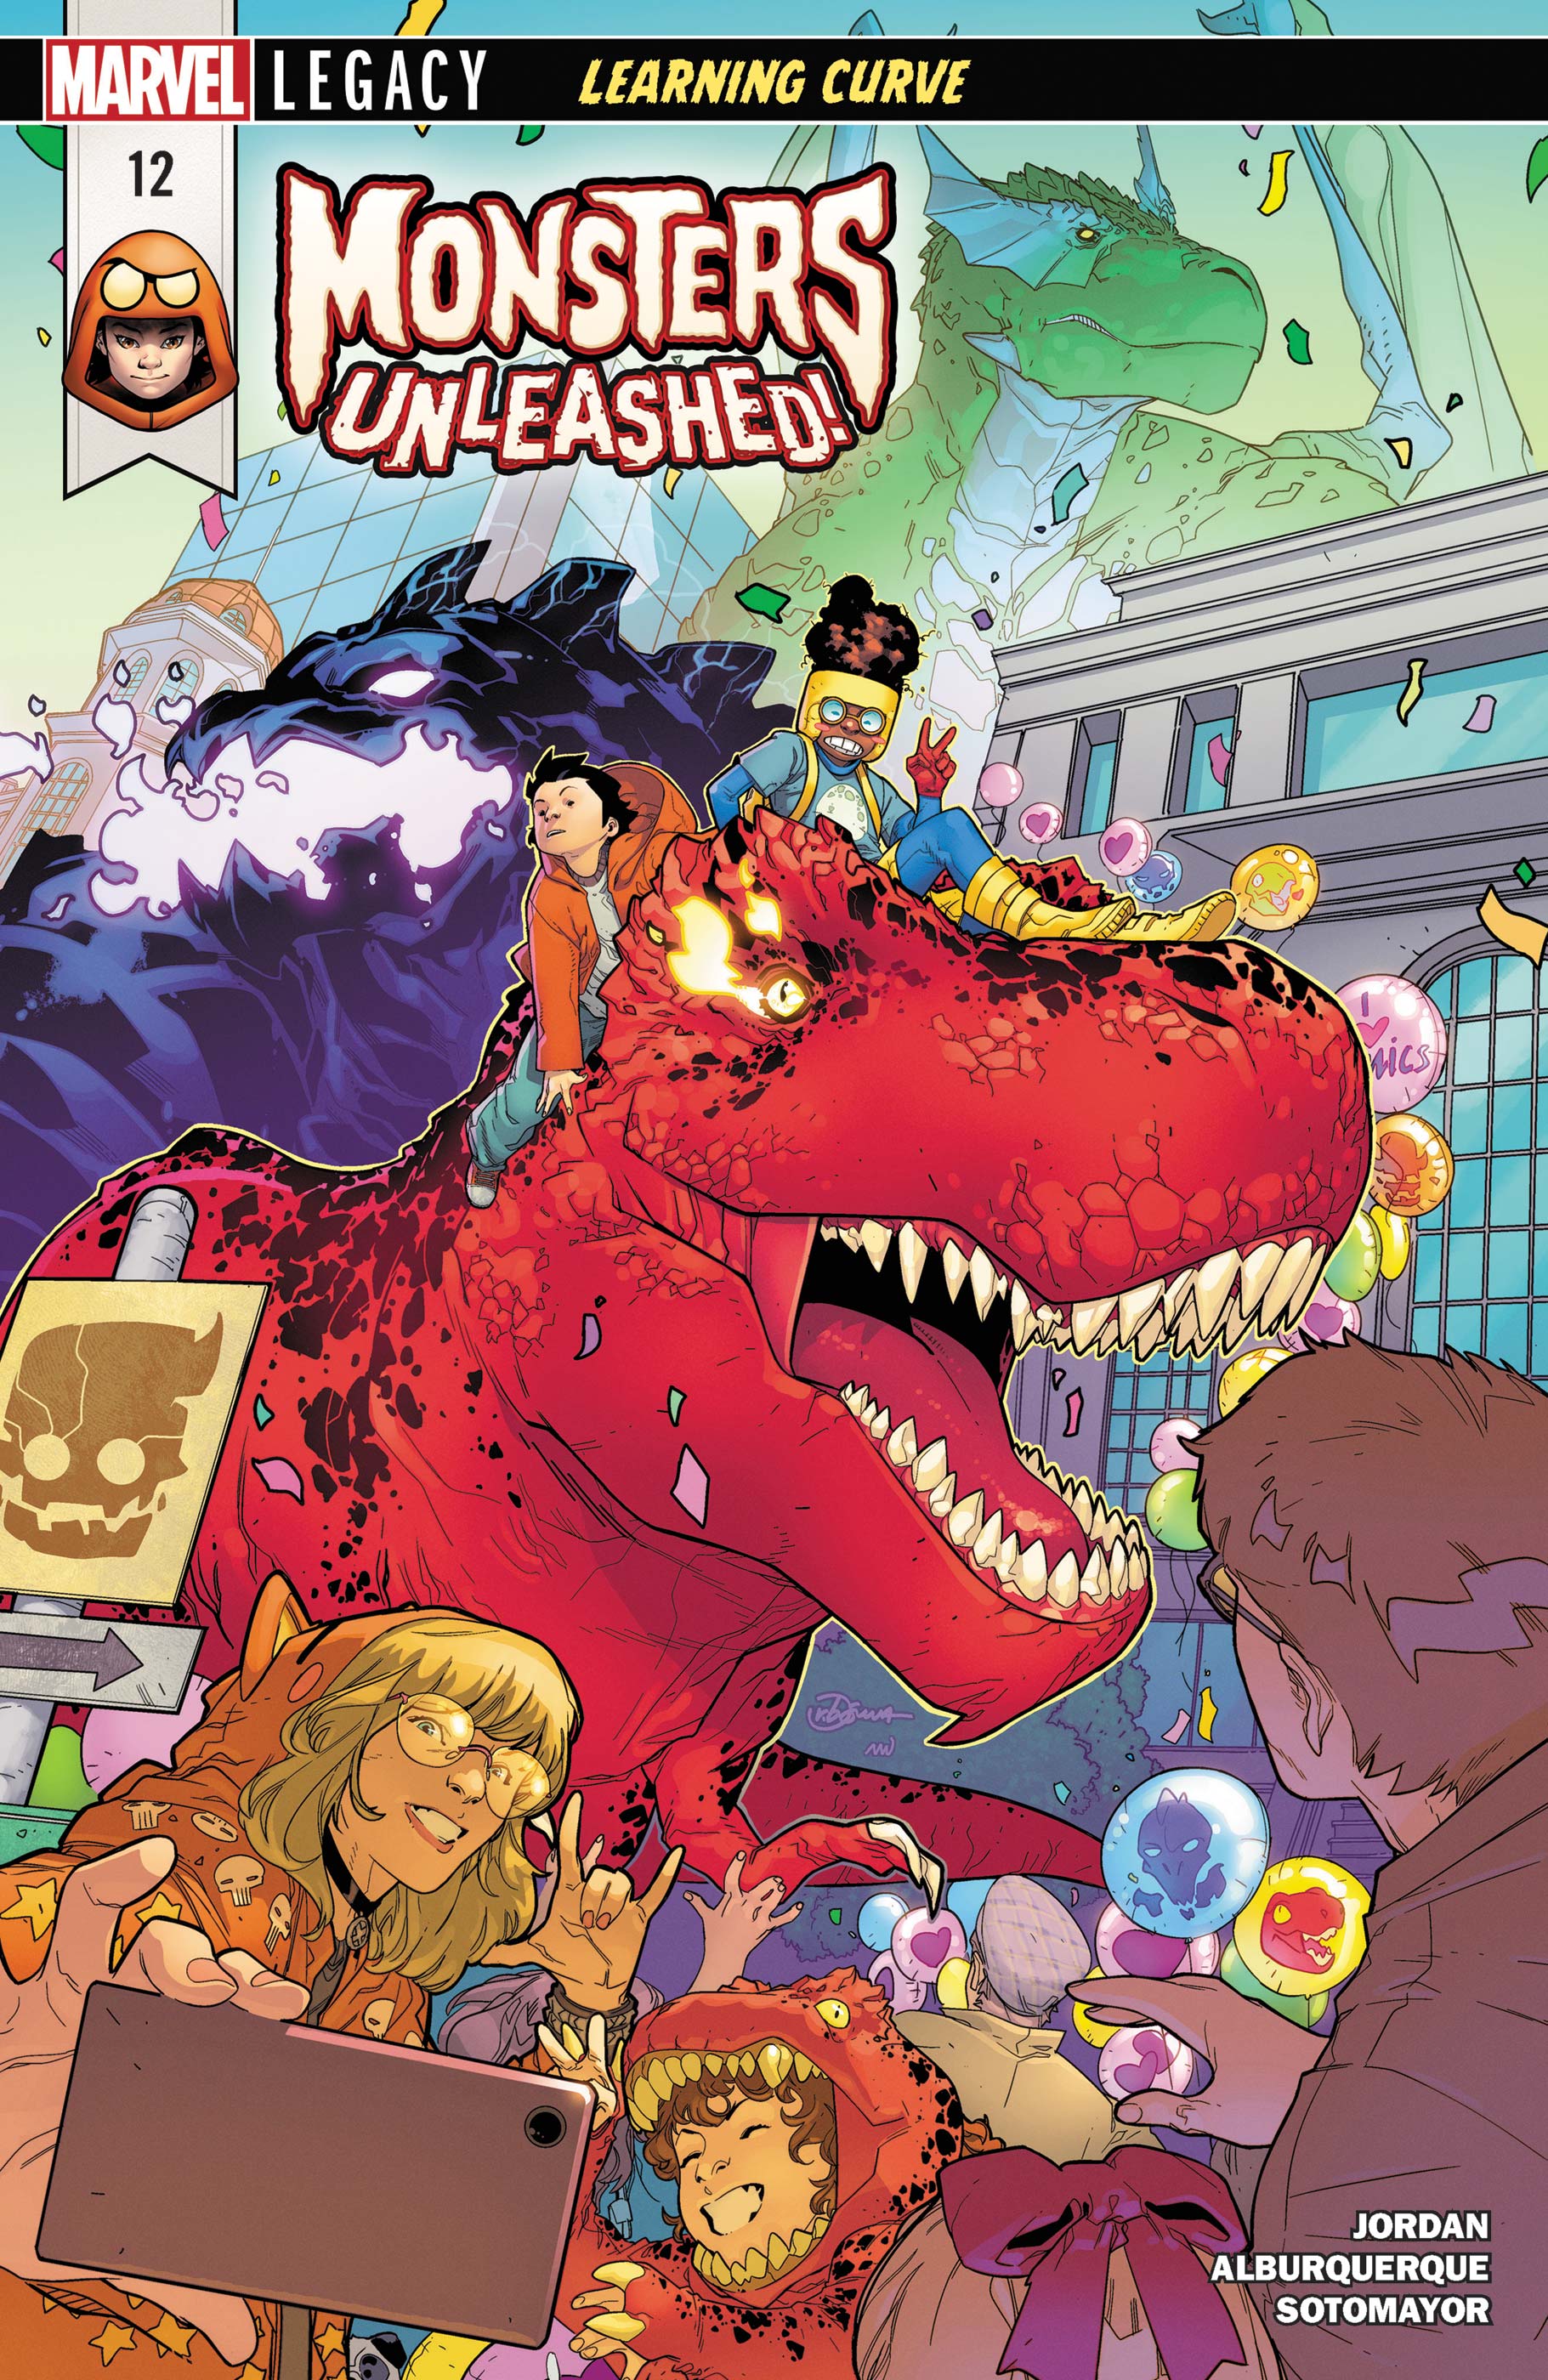 Monsters Unleashed (2017) #12